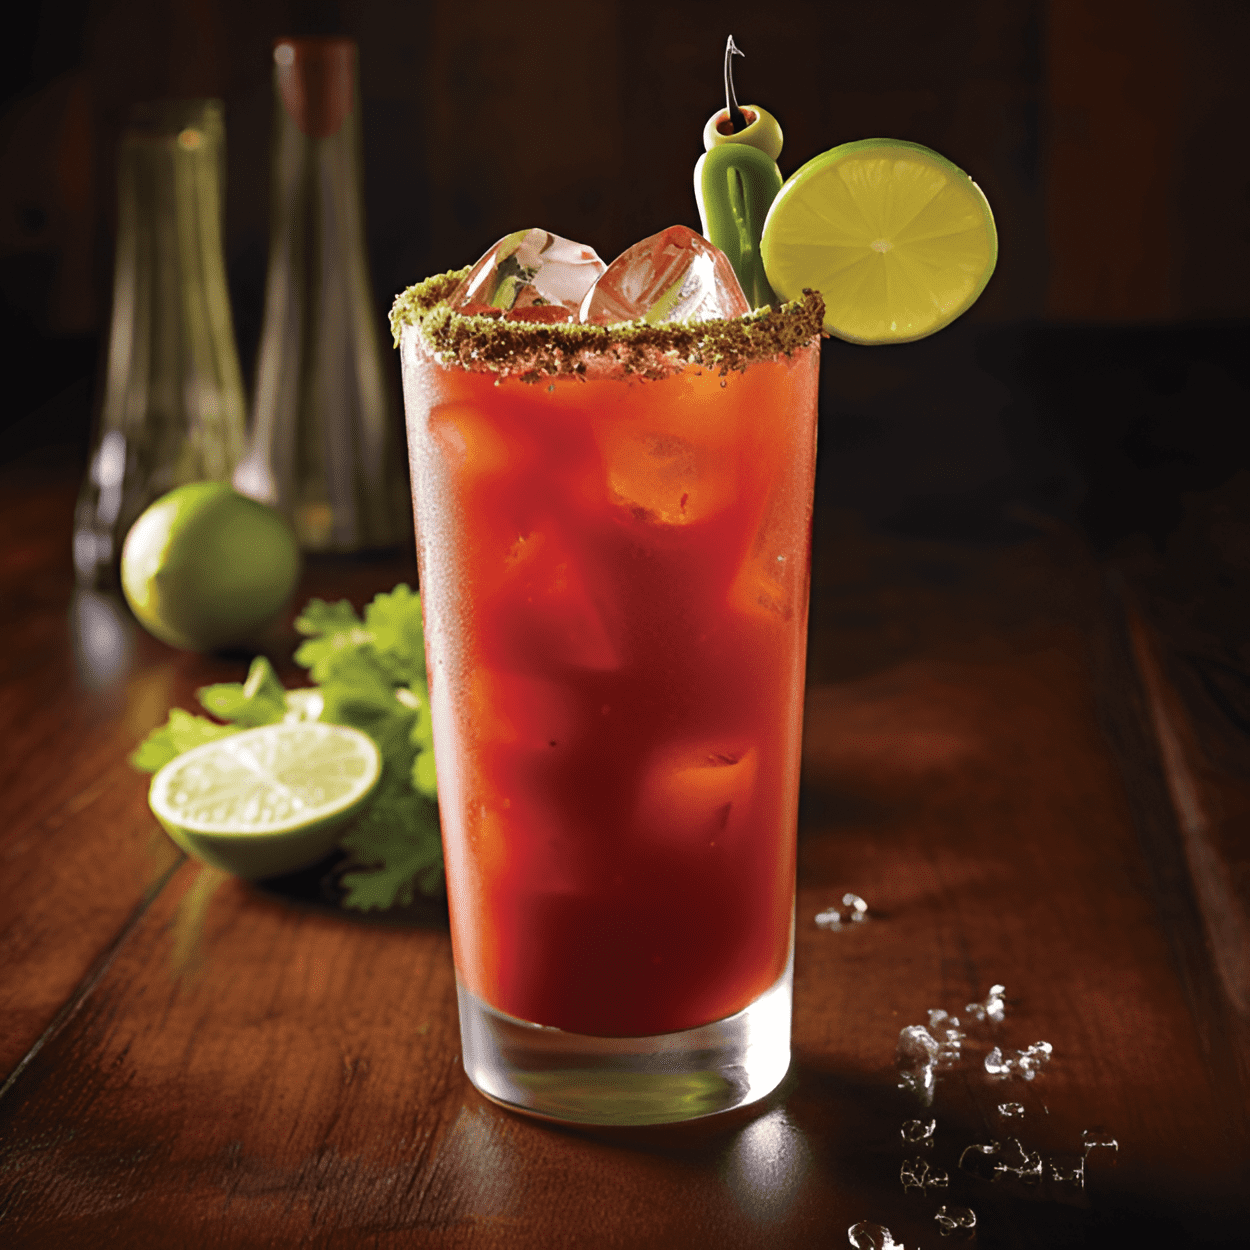 The Bloody Caesar is a savory, tangy, and slightly spicy cocktail. The combination of Clamato juice, vodka, and hot sauce creates a bold and robust flavor profile that is both refreshing and satisfying.